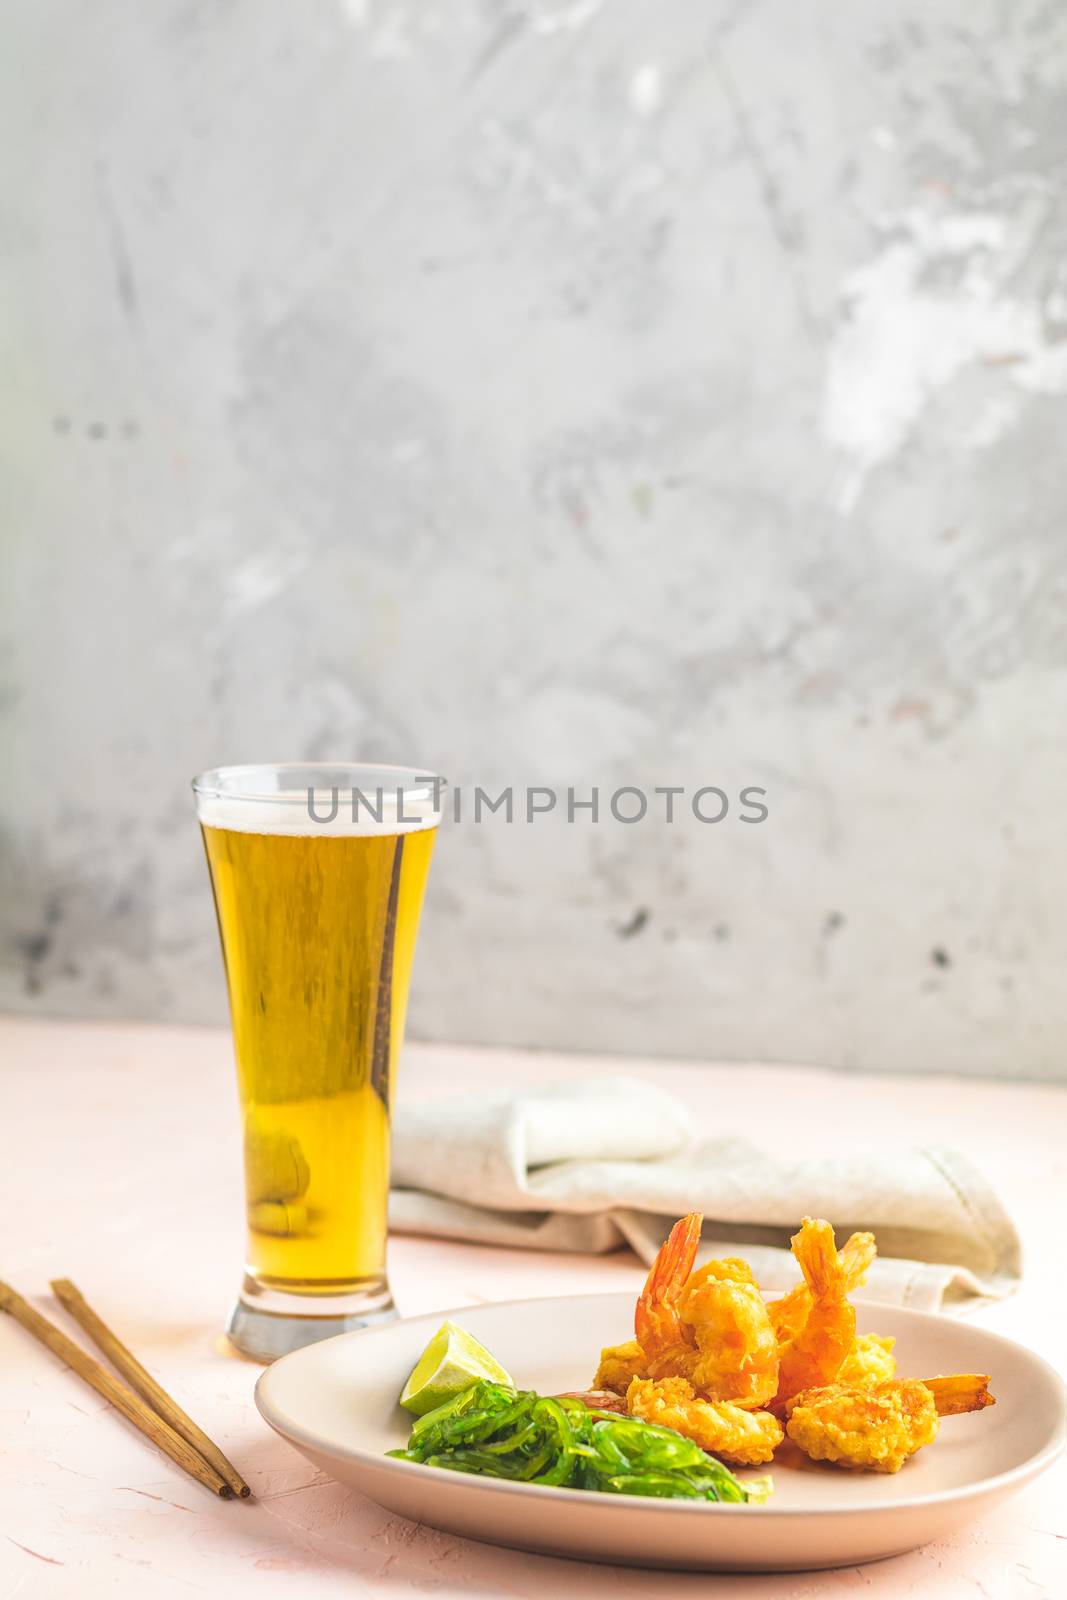 Fried Shrimps tempura with lime in light plate and glass of beer on pink or peach concrete surface background. Copy space Seafood tempura dish served japanese or eastern Asia style with chopsticks